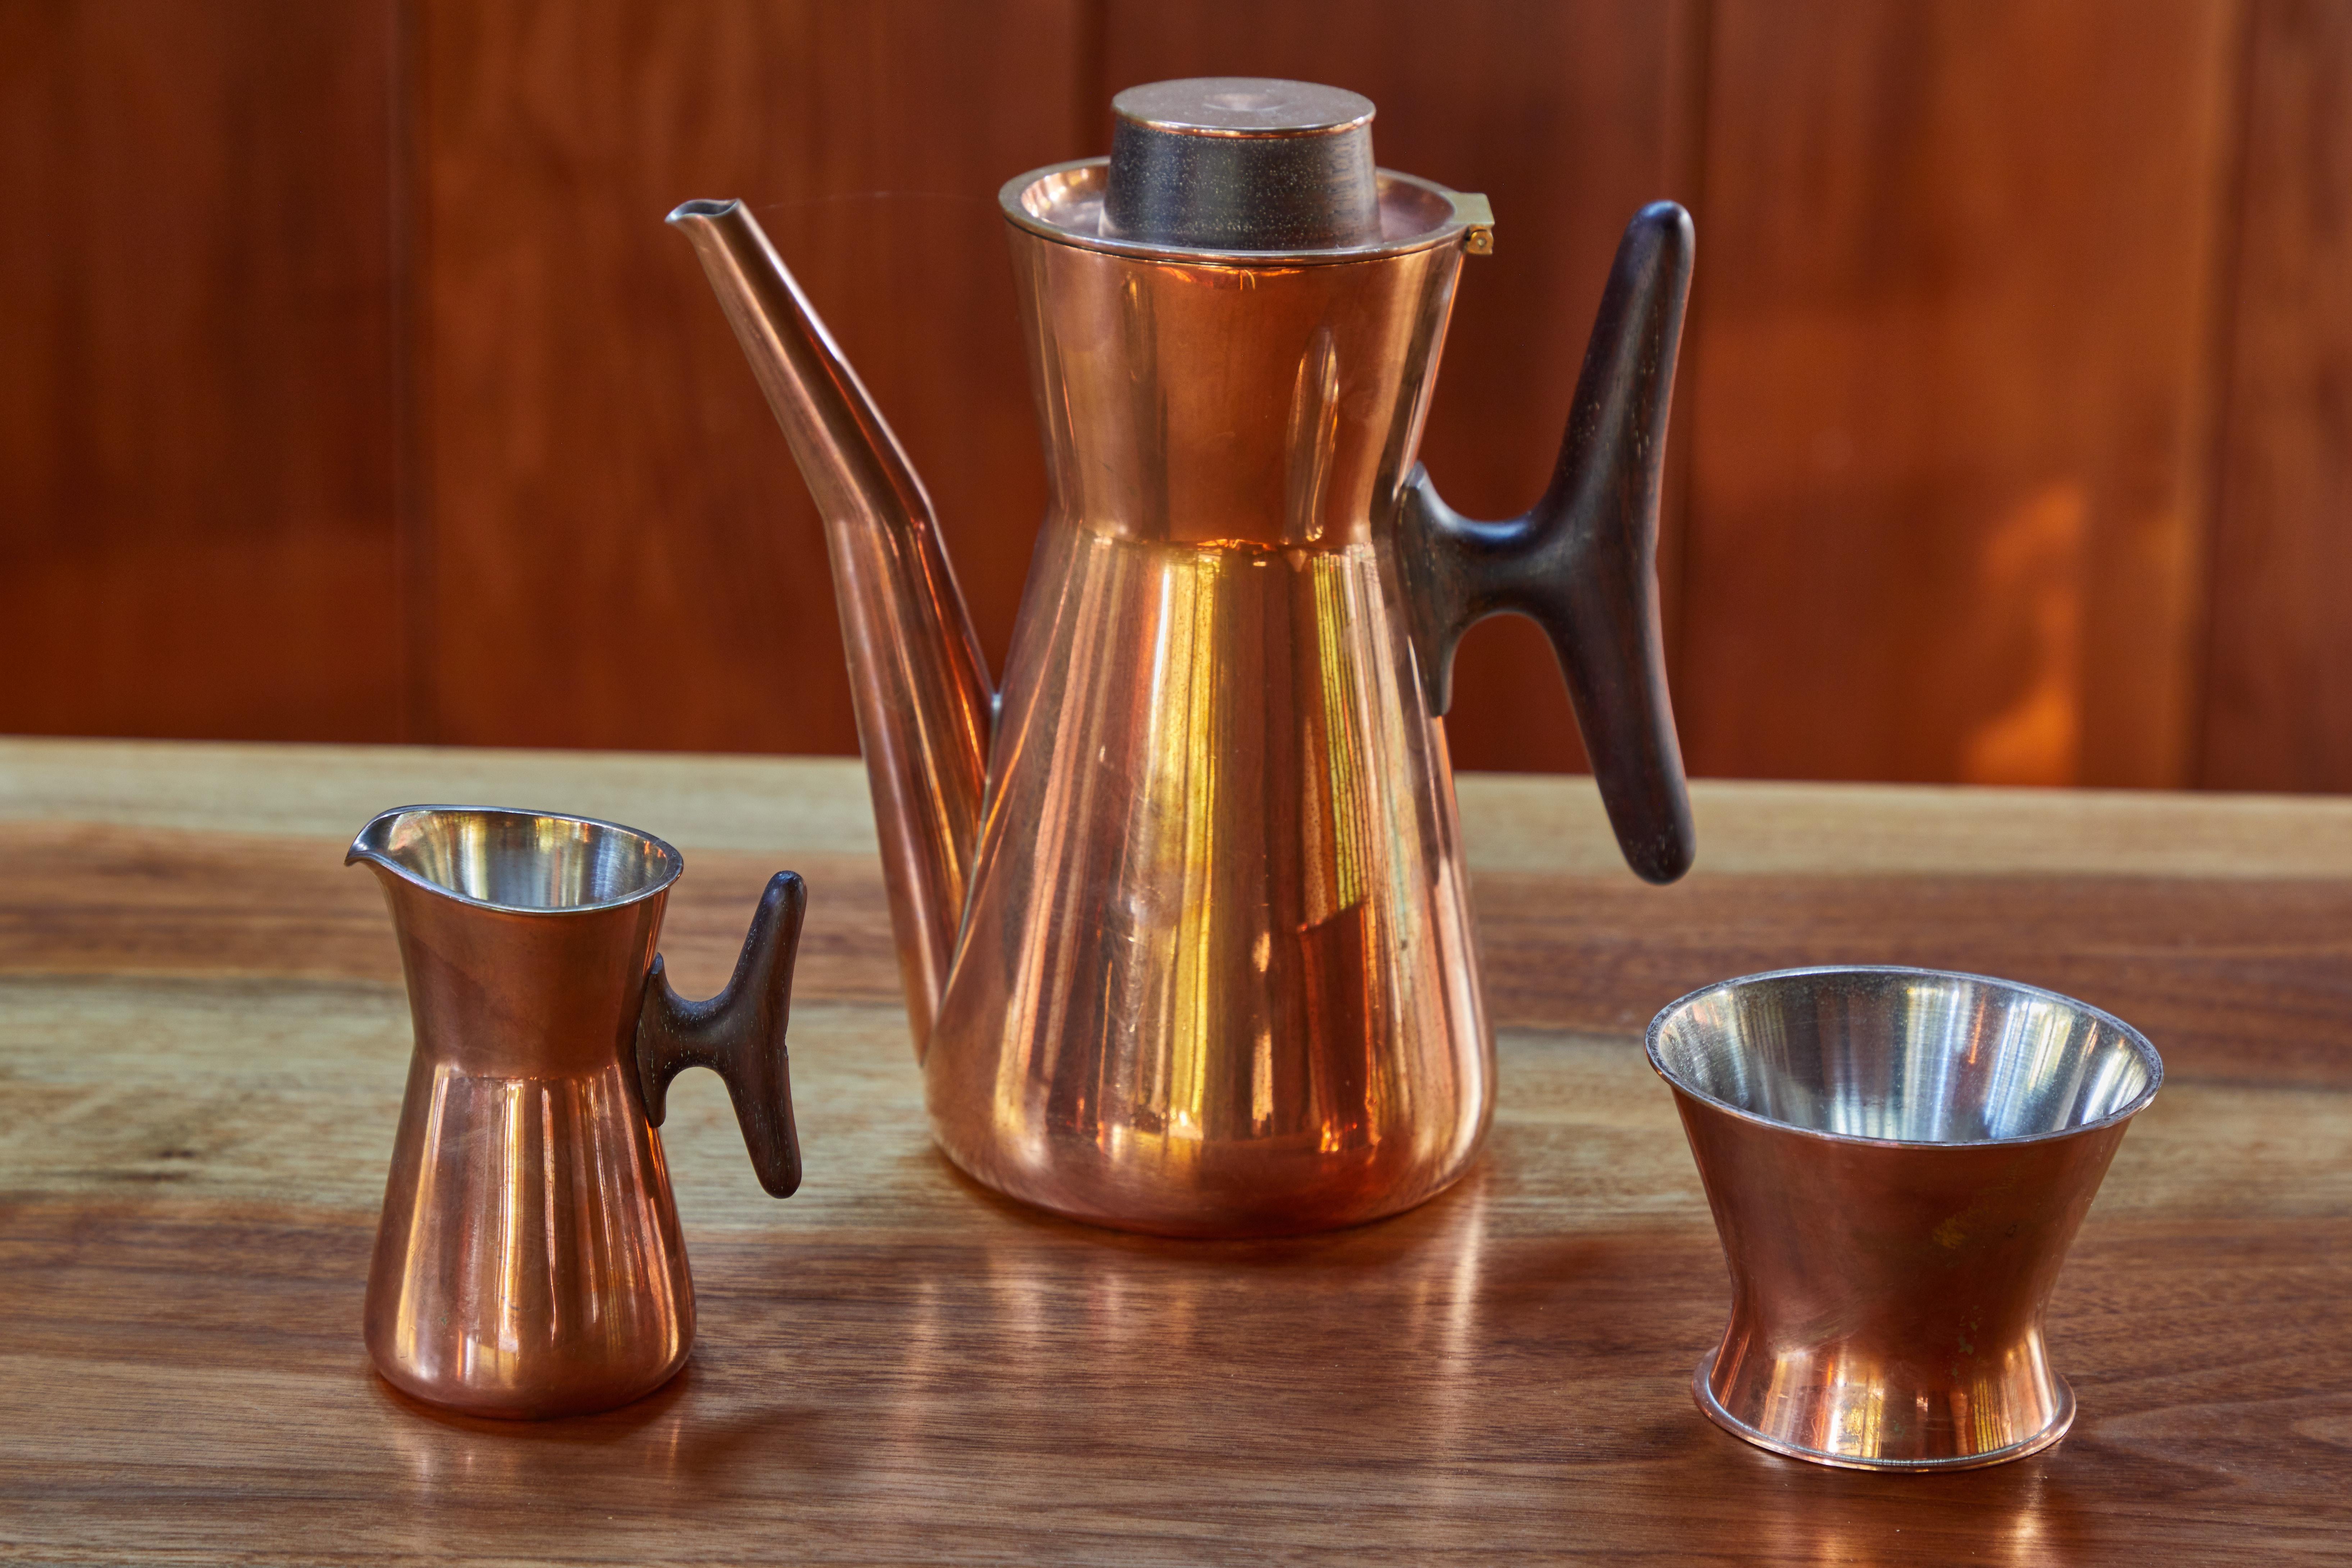 1960s Tapio Wirkkala copper and silver coffee set for Kultakeskus Oy. A solid copper coffee set including coffee pot, creamer, and sugar pot. Executed in copper lined in silver and hardwood (possibly rosewood) handles, these sets were handmade to